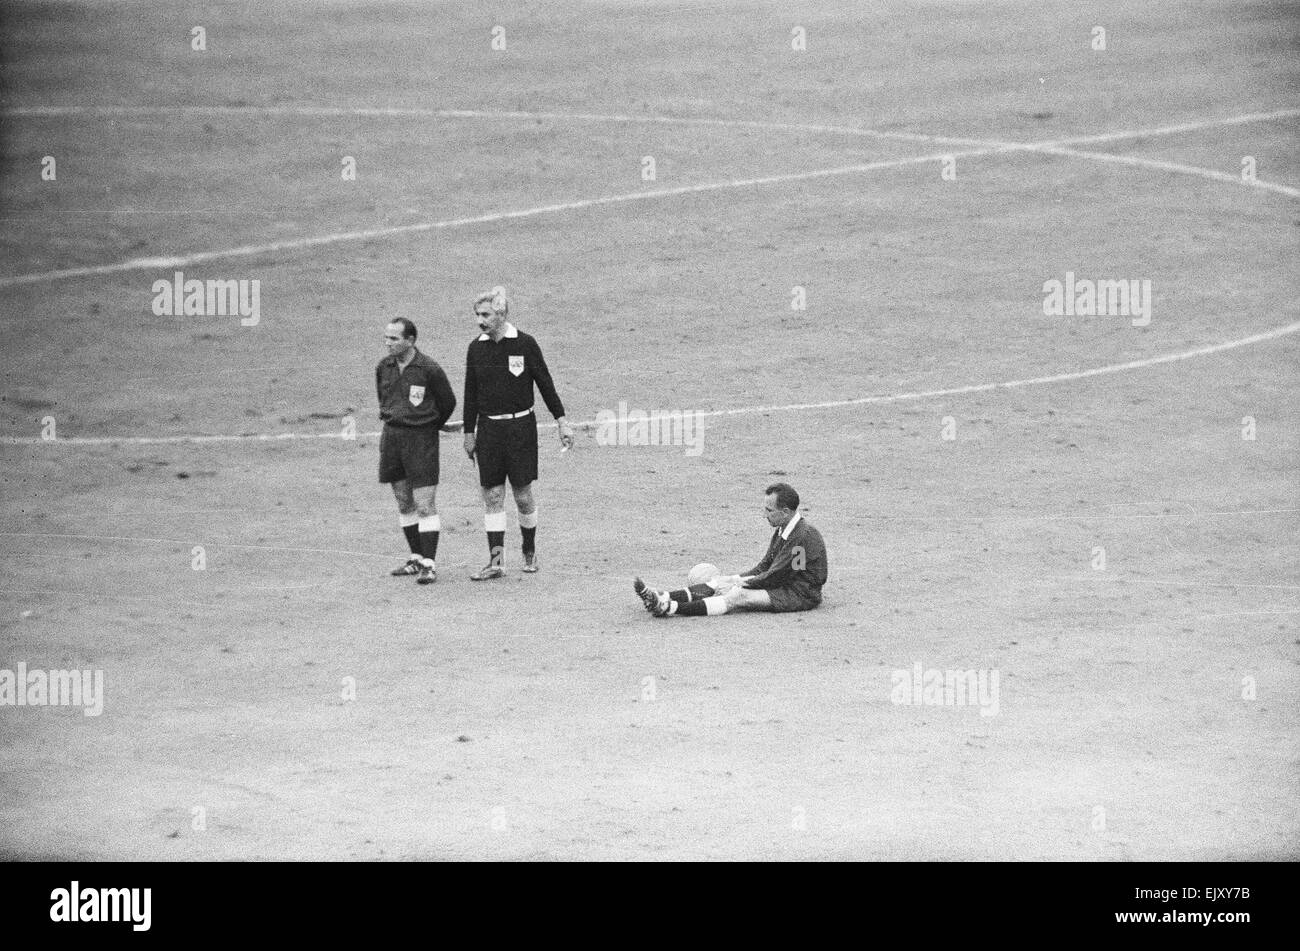 England v West Germany World Cup Final 1999, 30th July 1966.  The officials were also feeling the strain. Dienst took a well-earned rest, while linesman Karol Galba (left) and in particular Tofik Bakhramov (centre) readied themselves for what would be the most dramatic of contributions to subsequent events.  Final Score:  England 4-2 West Germany A.E.T. *** Local Caption *** England v West Germany World Cup Final 1999, 30th July 1966.  Final Score:  England 4-2 West Germany A.E.T. Stock Photo